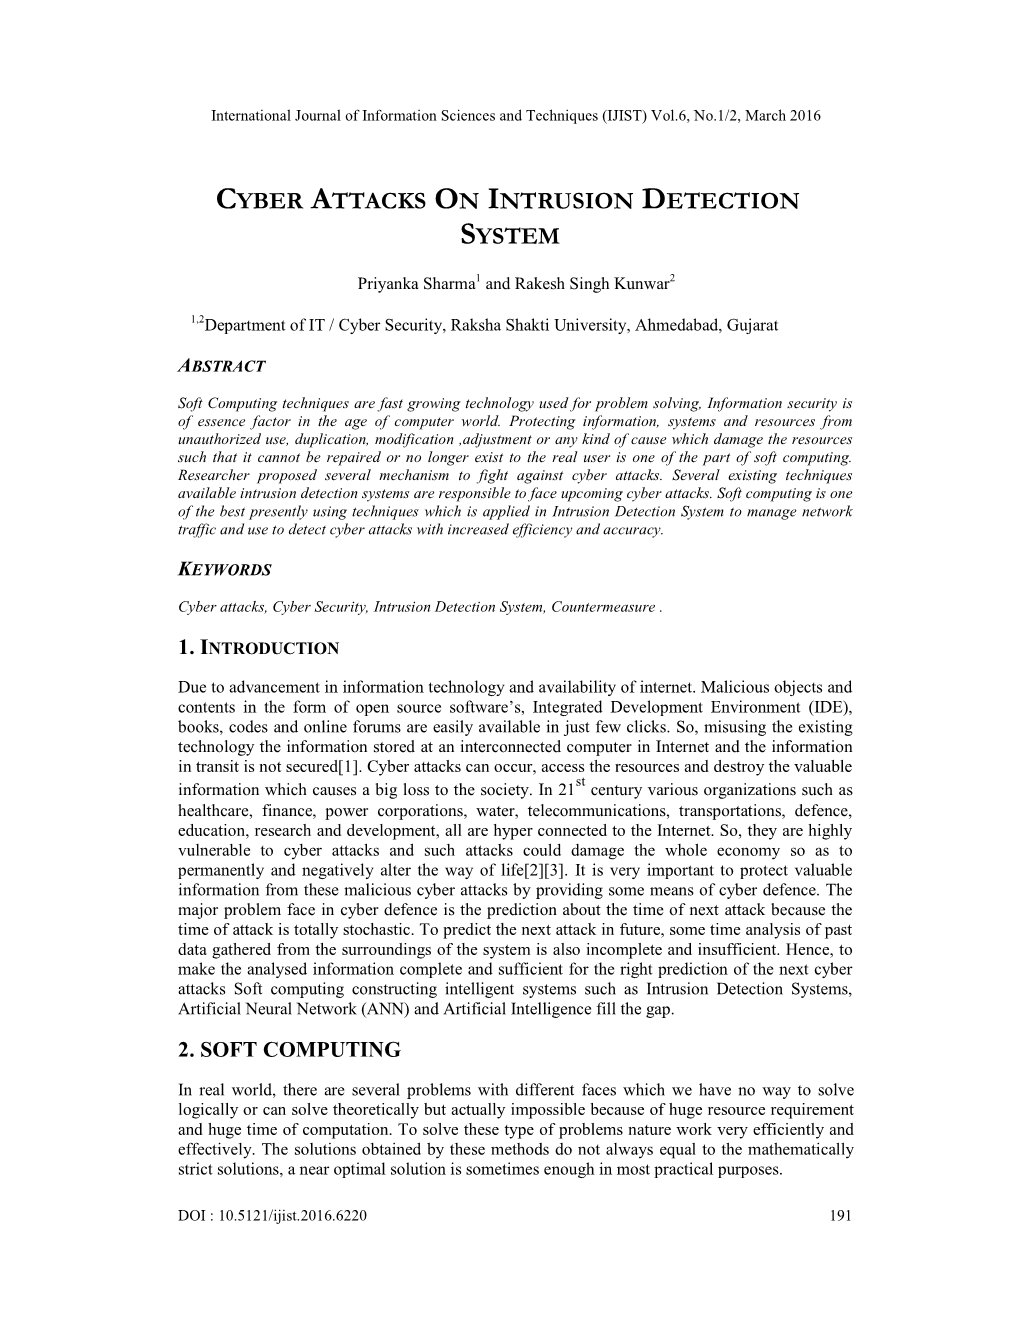 Cyber Attacks on Intrusion Detection System